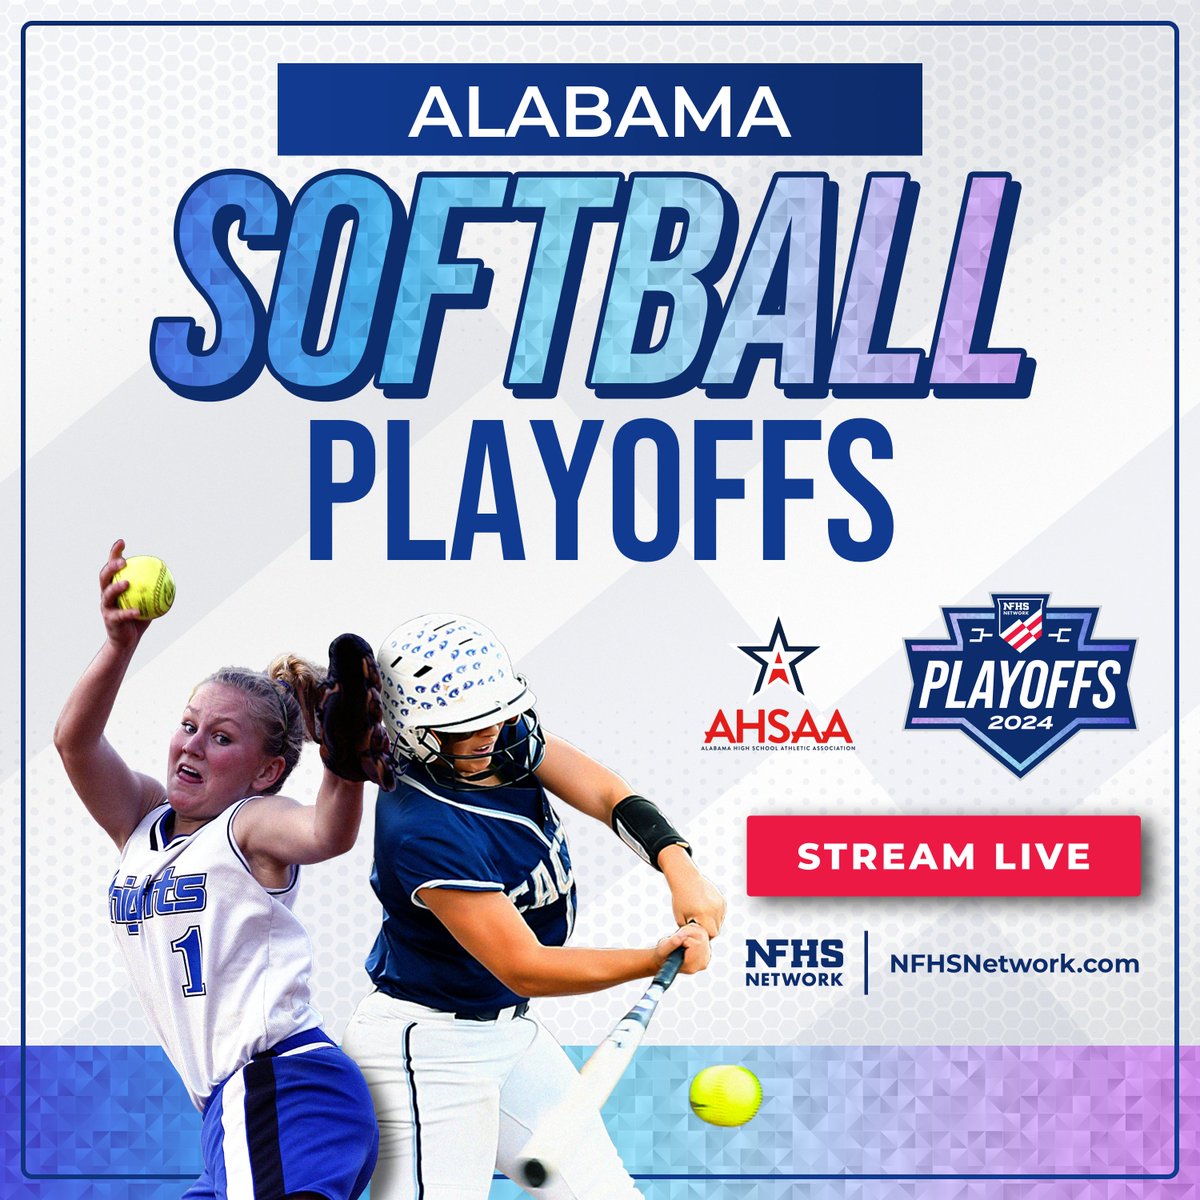 @AHSAAUpdates Catch more of the 2024 AHSAA Softball Playoffs on the #NFHSNetwork today! 🥎 Watch live through the OFFICIAL streaming link here: bit.ly/3MocSxS 📲